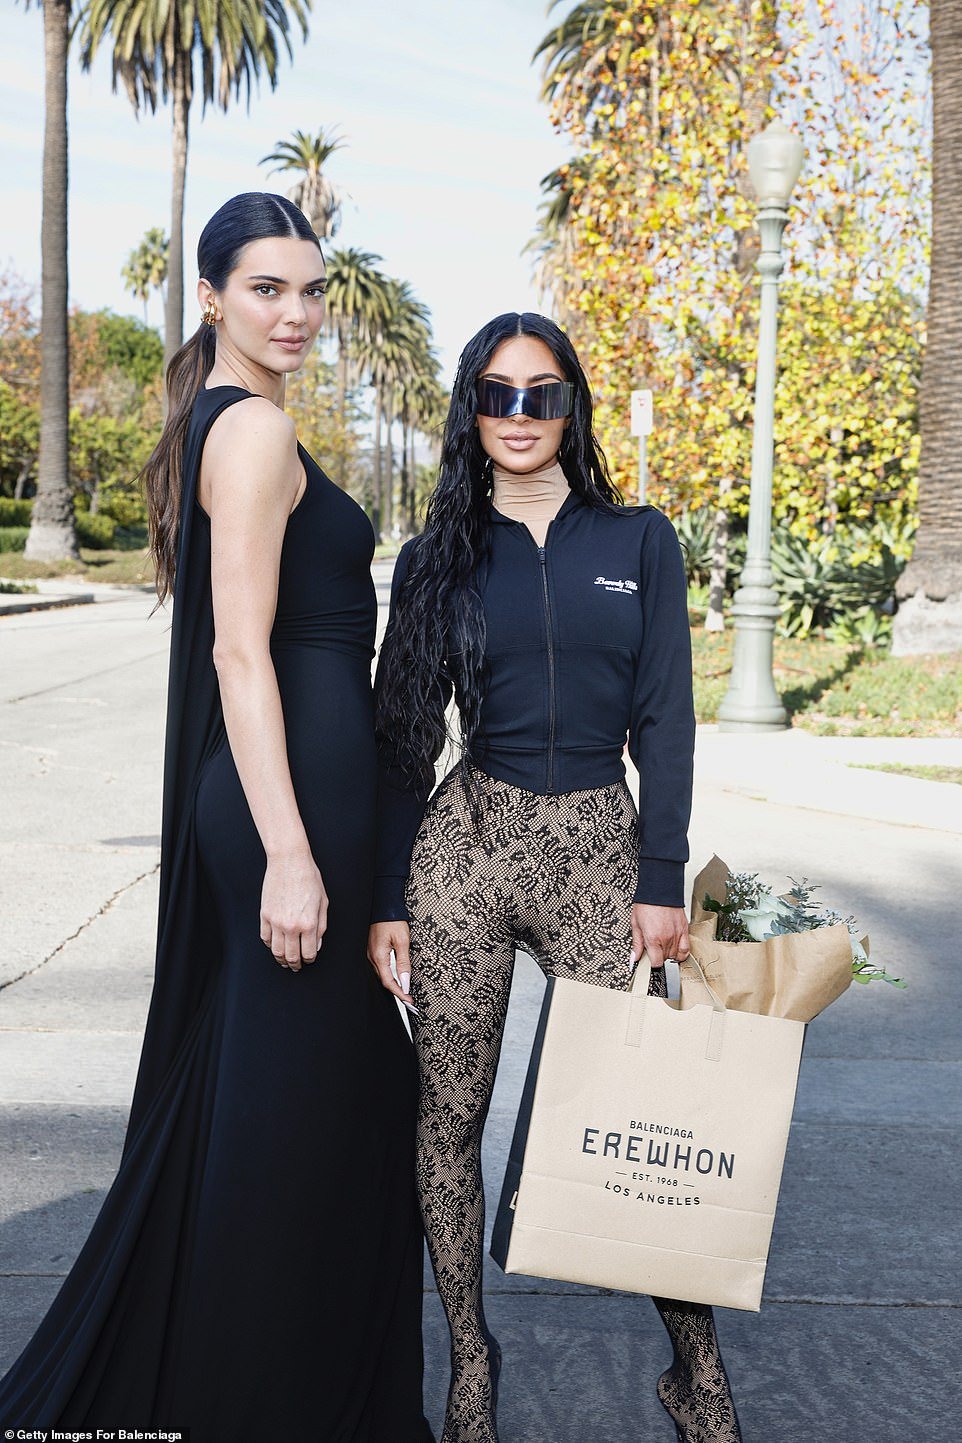 She was joined by sister Kendall Jenner, 28, who stunned in a sleeveless black maxi dress